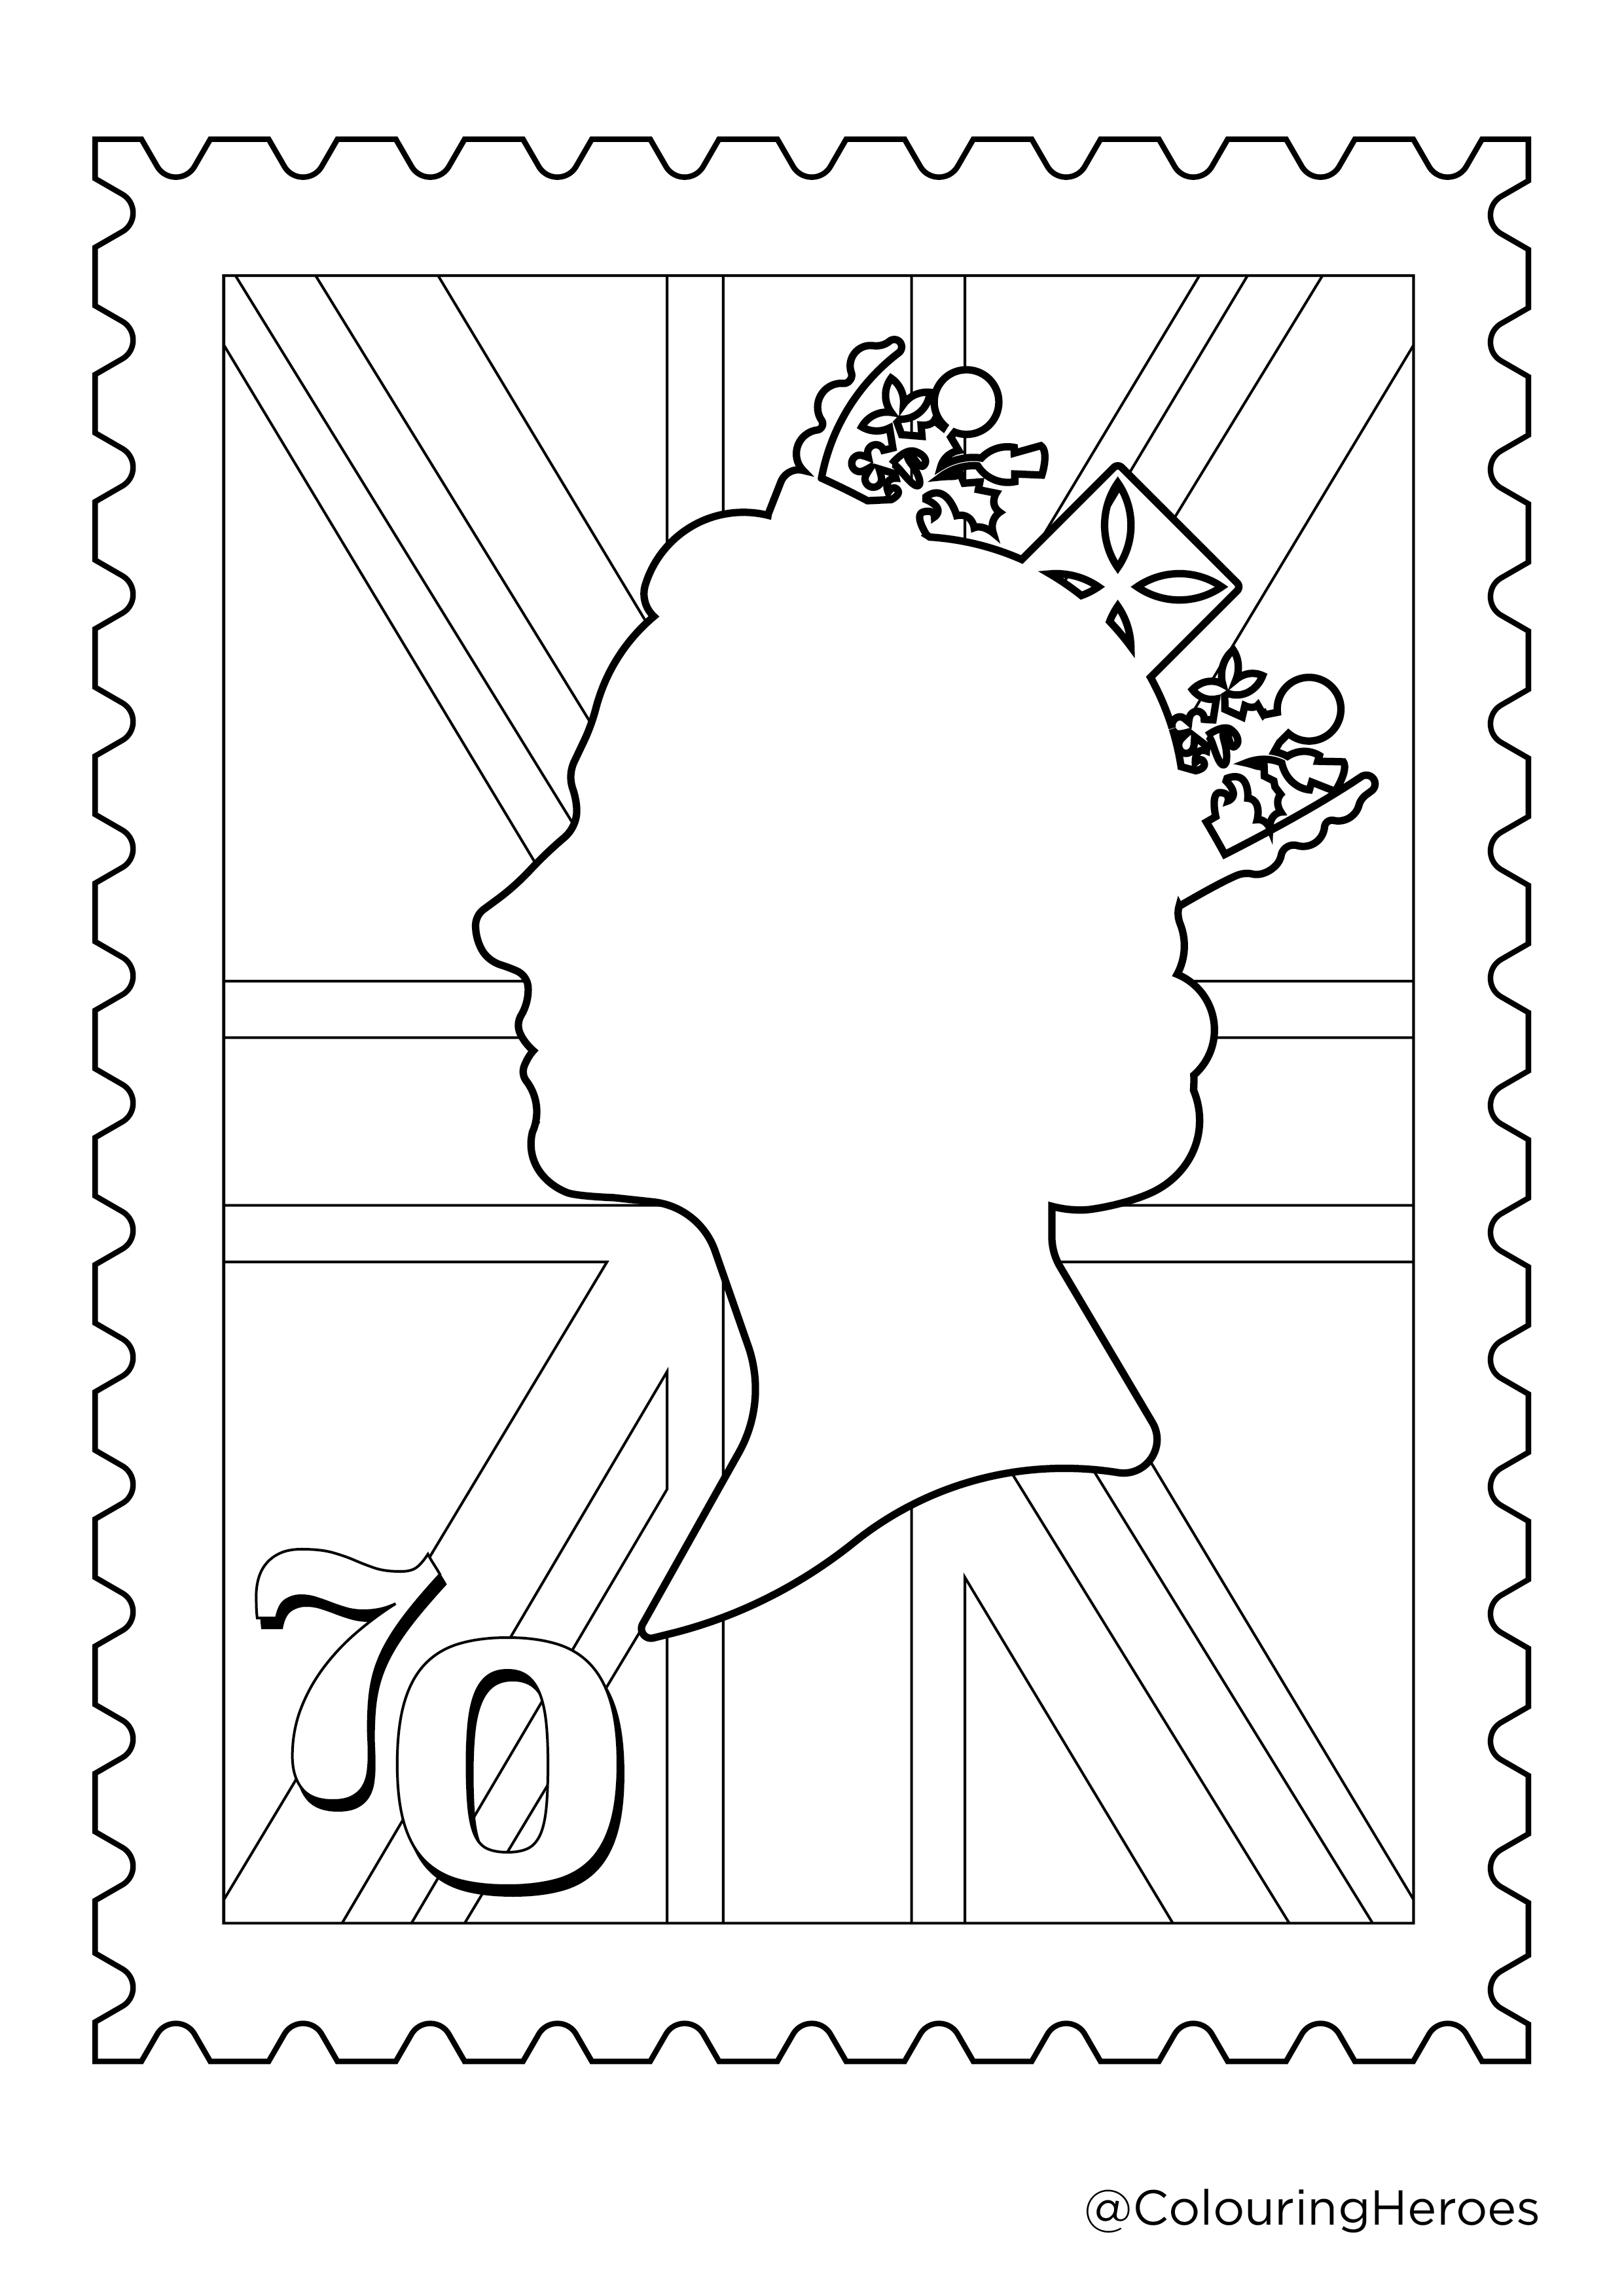 Queen's Platinum Jubilee Stamp Colouring In Sheet